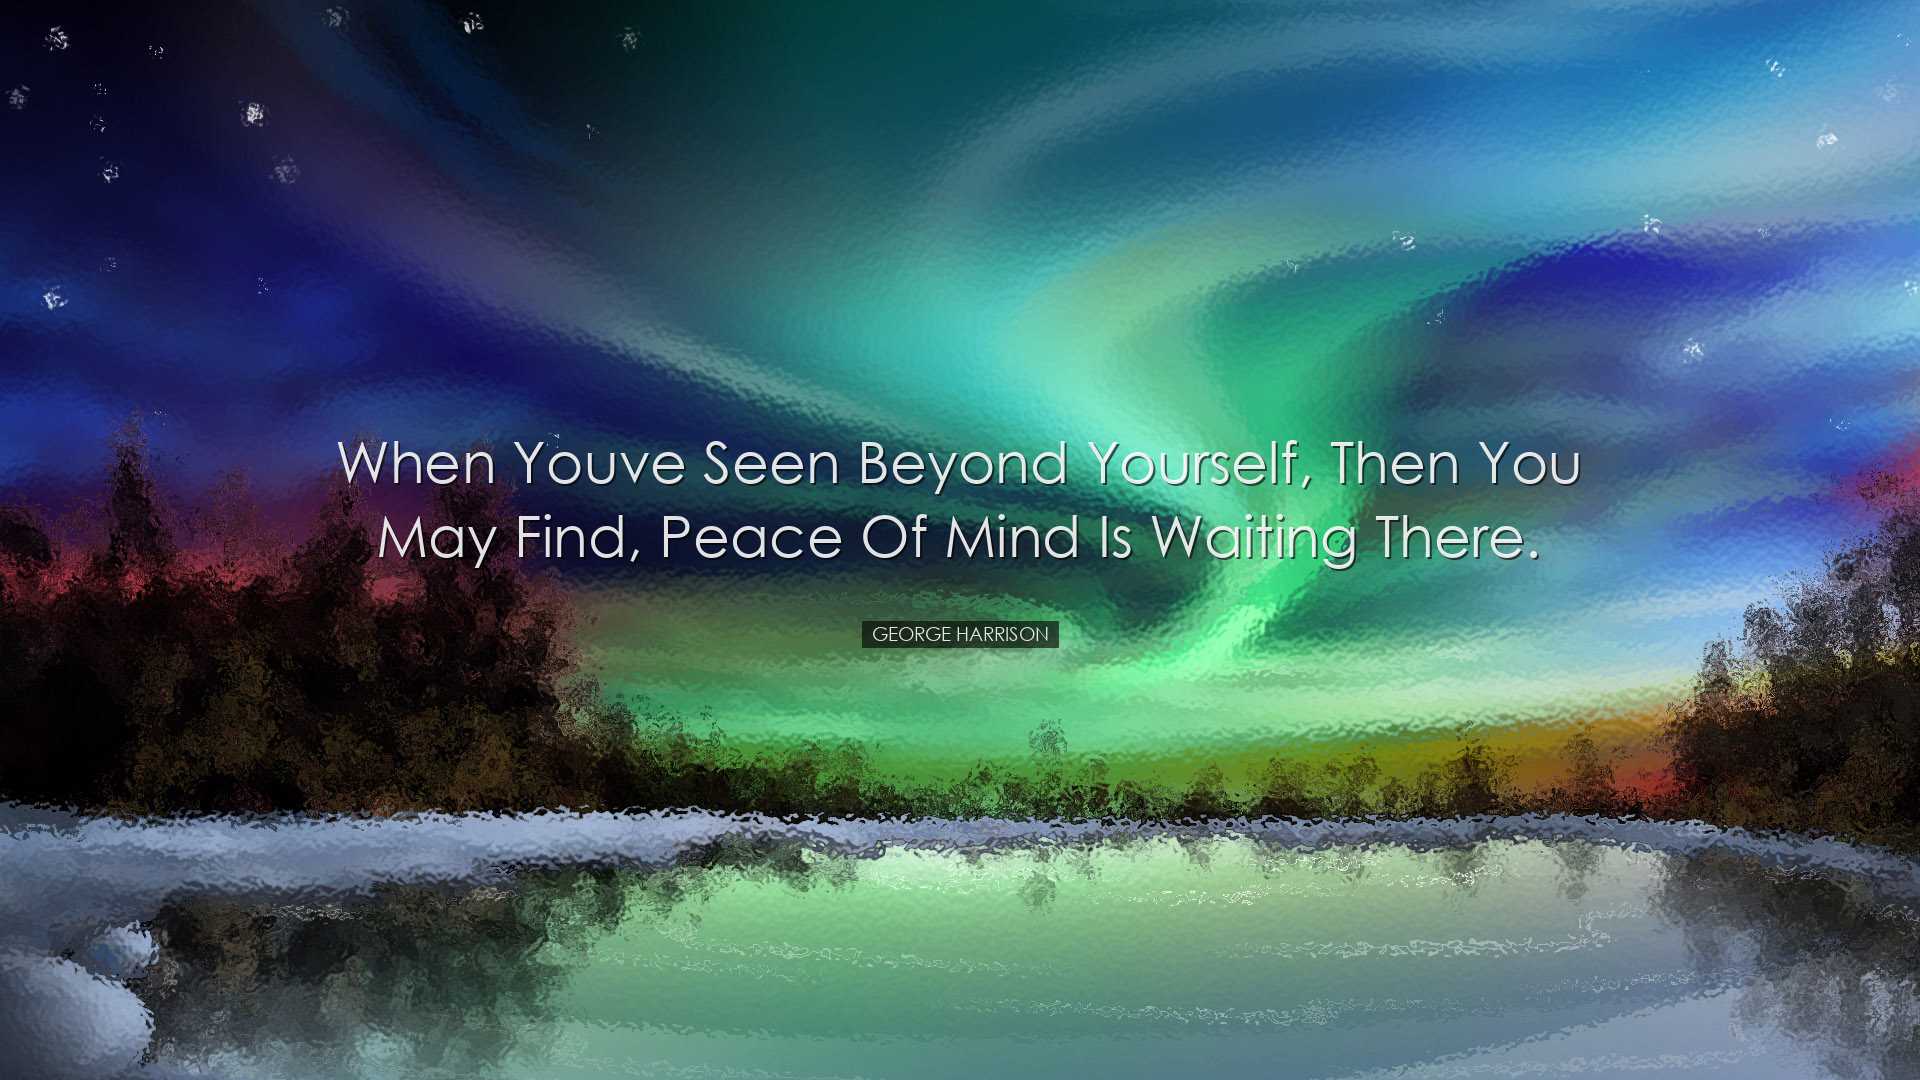 When youve seen beyond yourself, then you may find, peace of mind